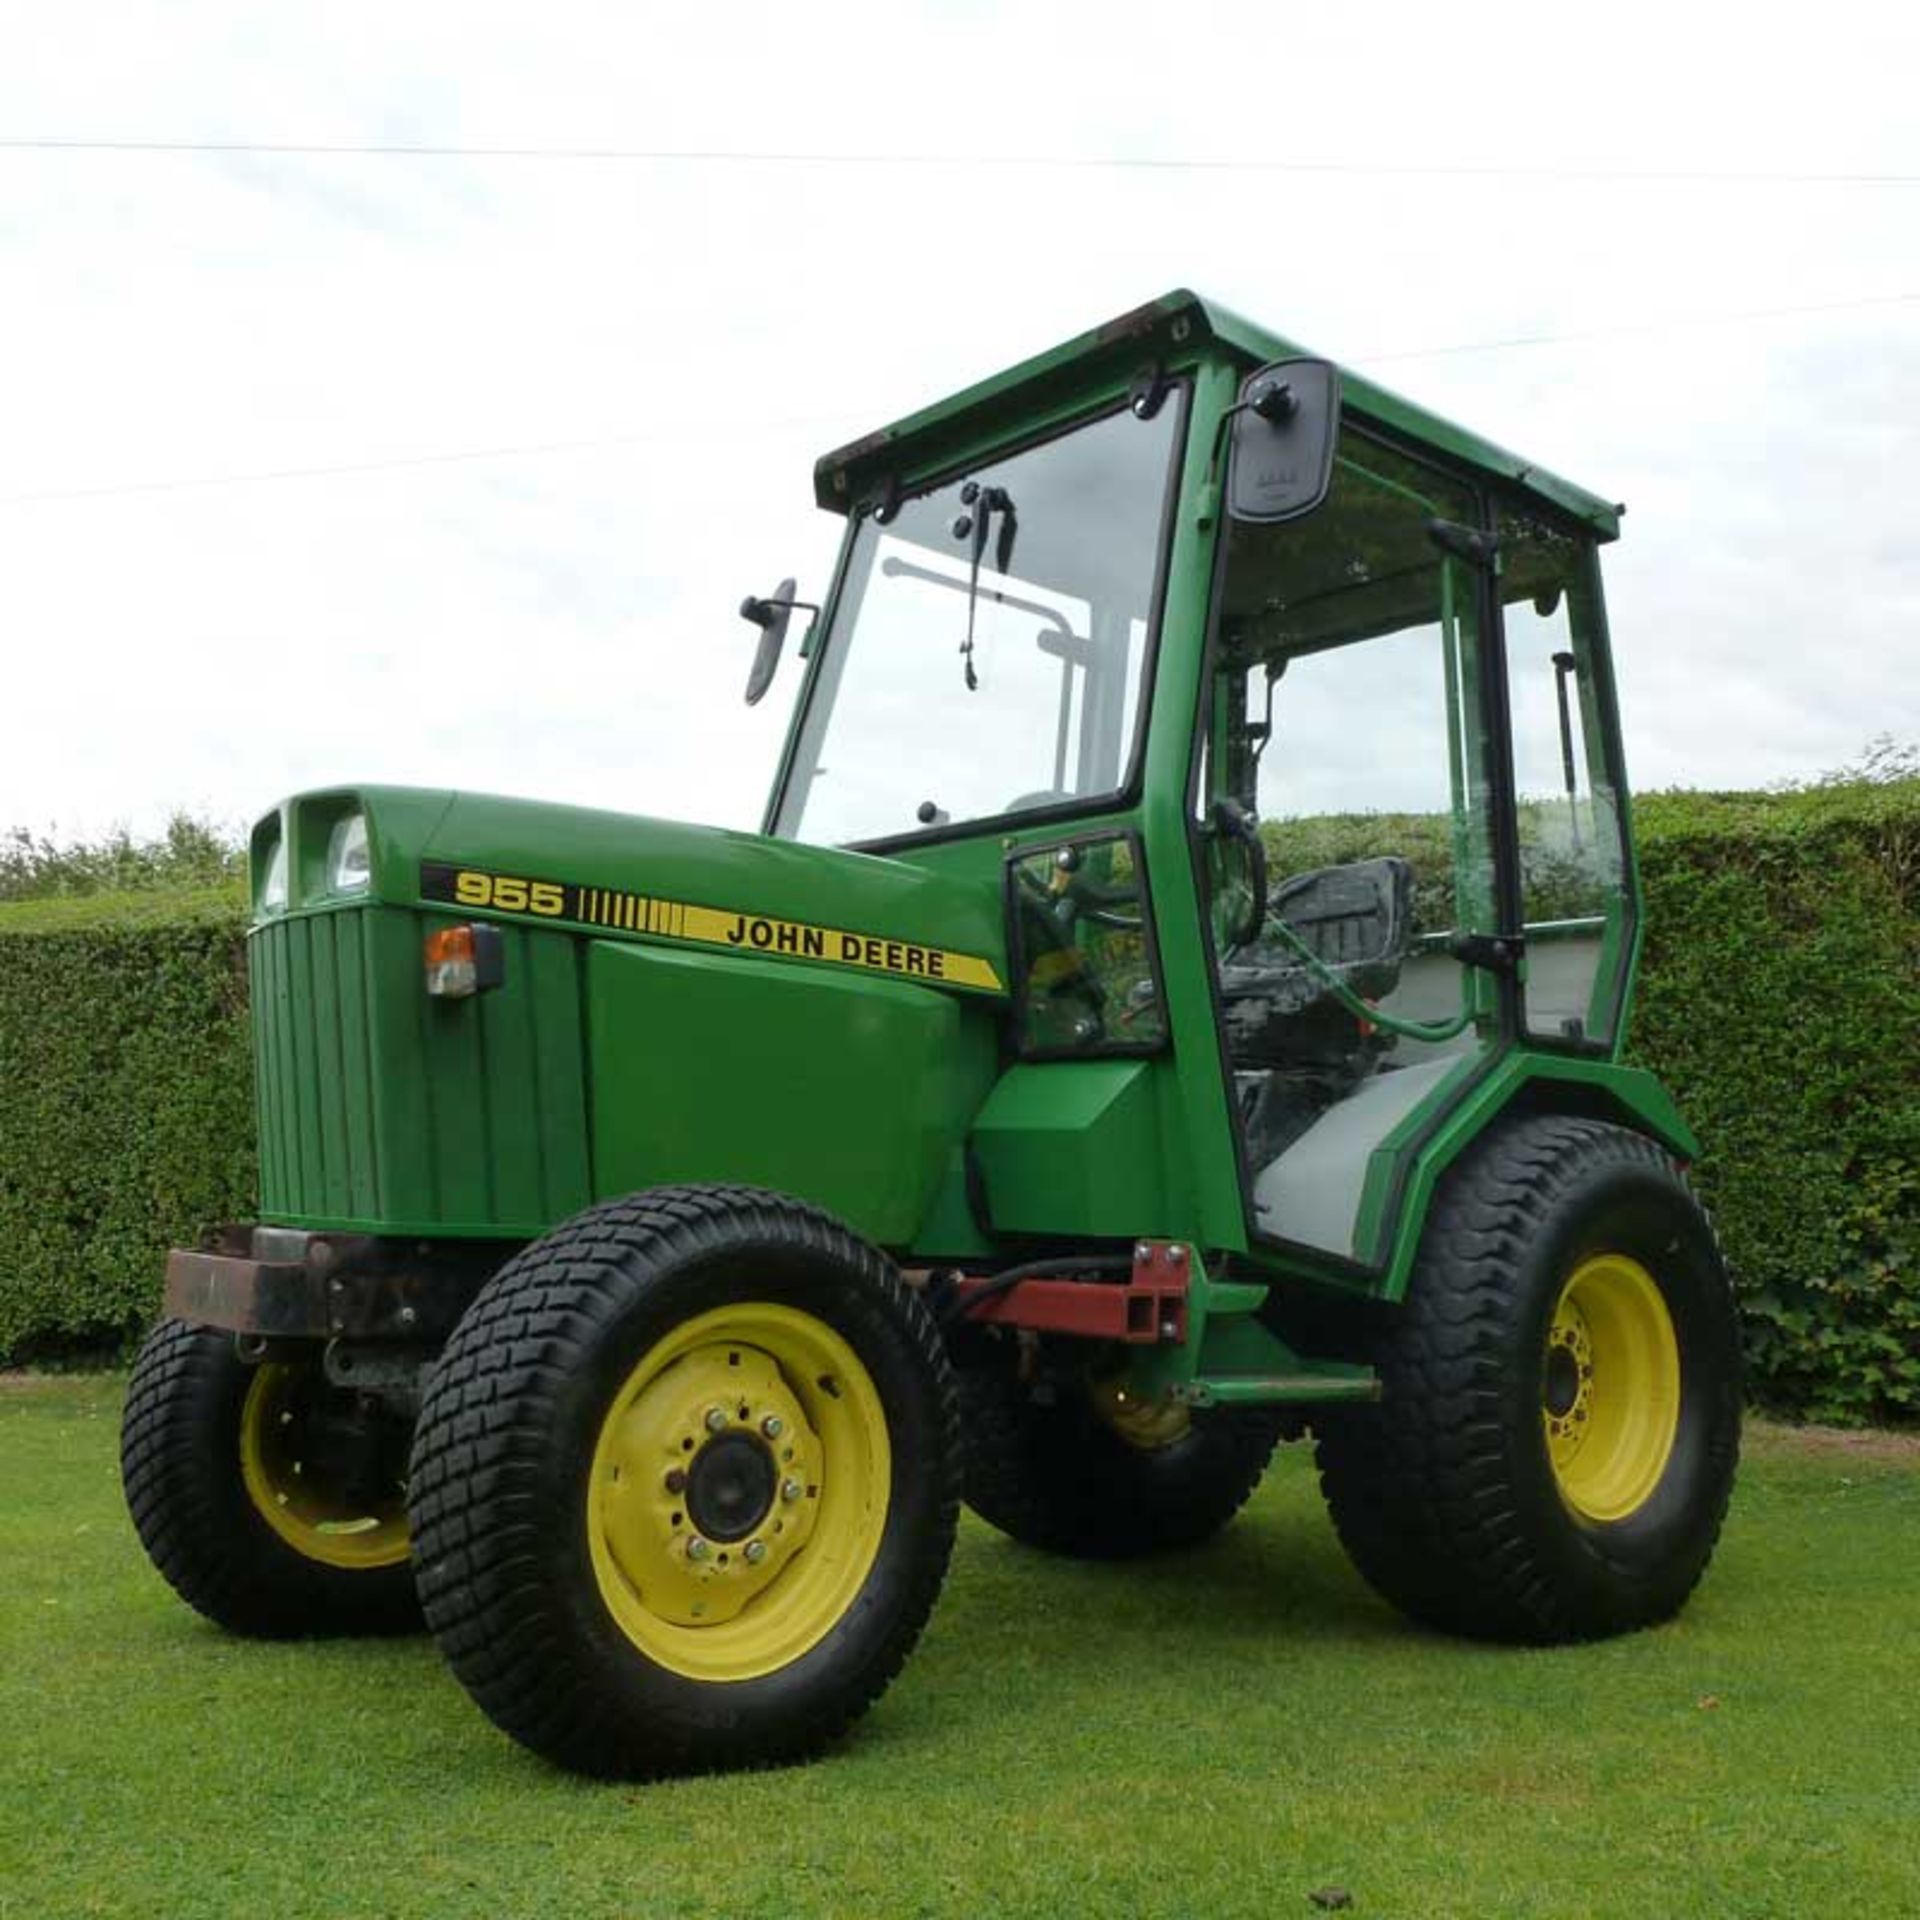 1992 John Deere 955 Compact Tractor With Full Mauser Cab - Image 3 of 5